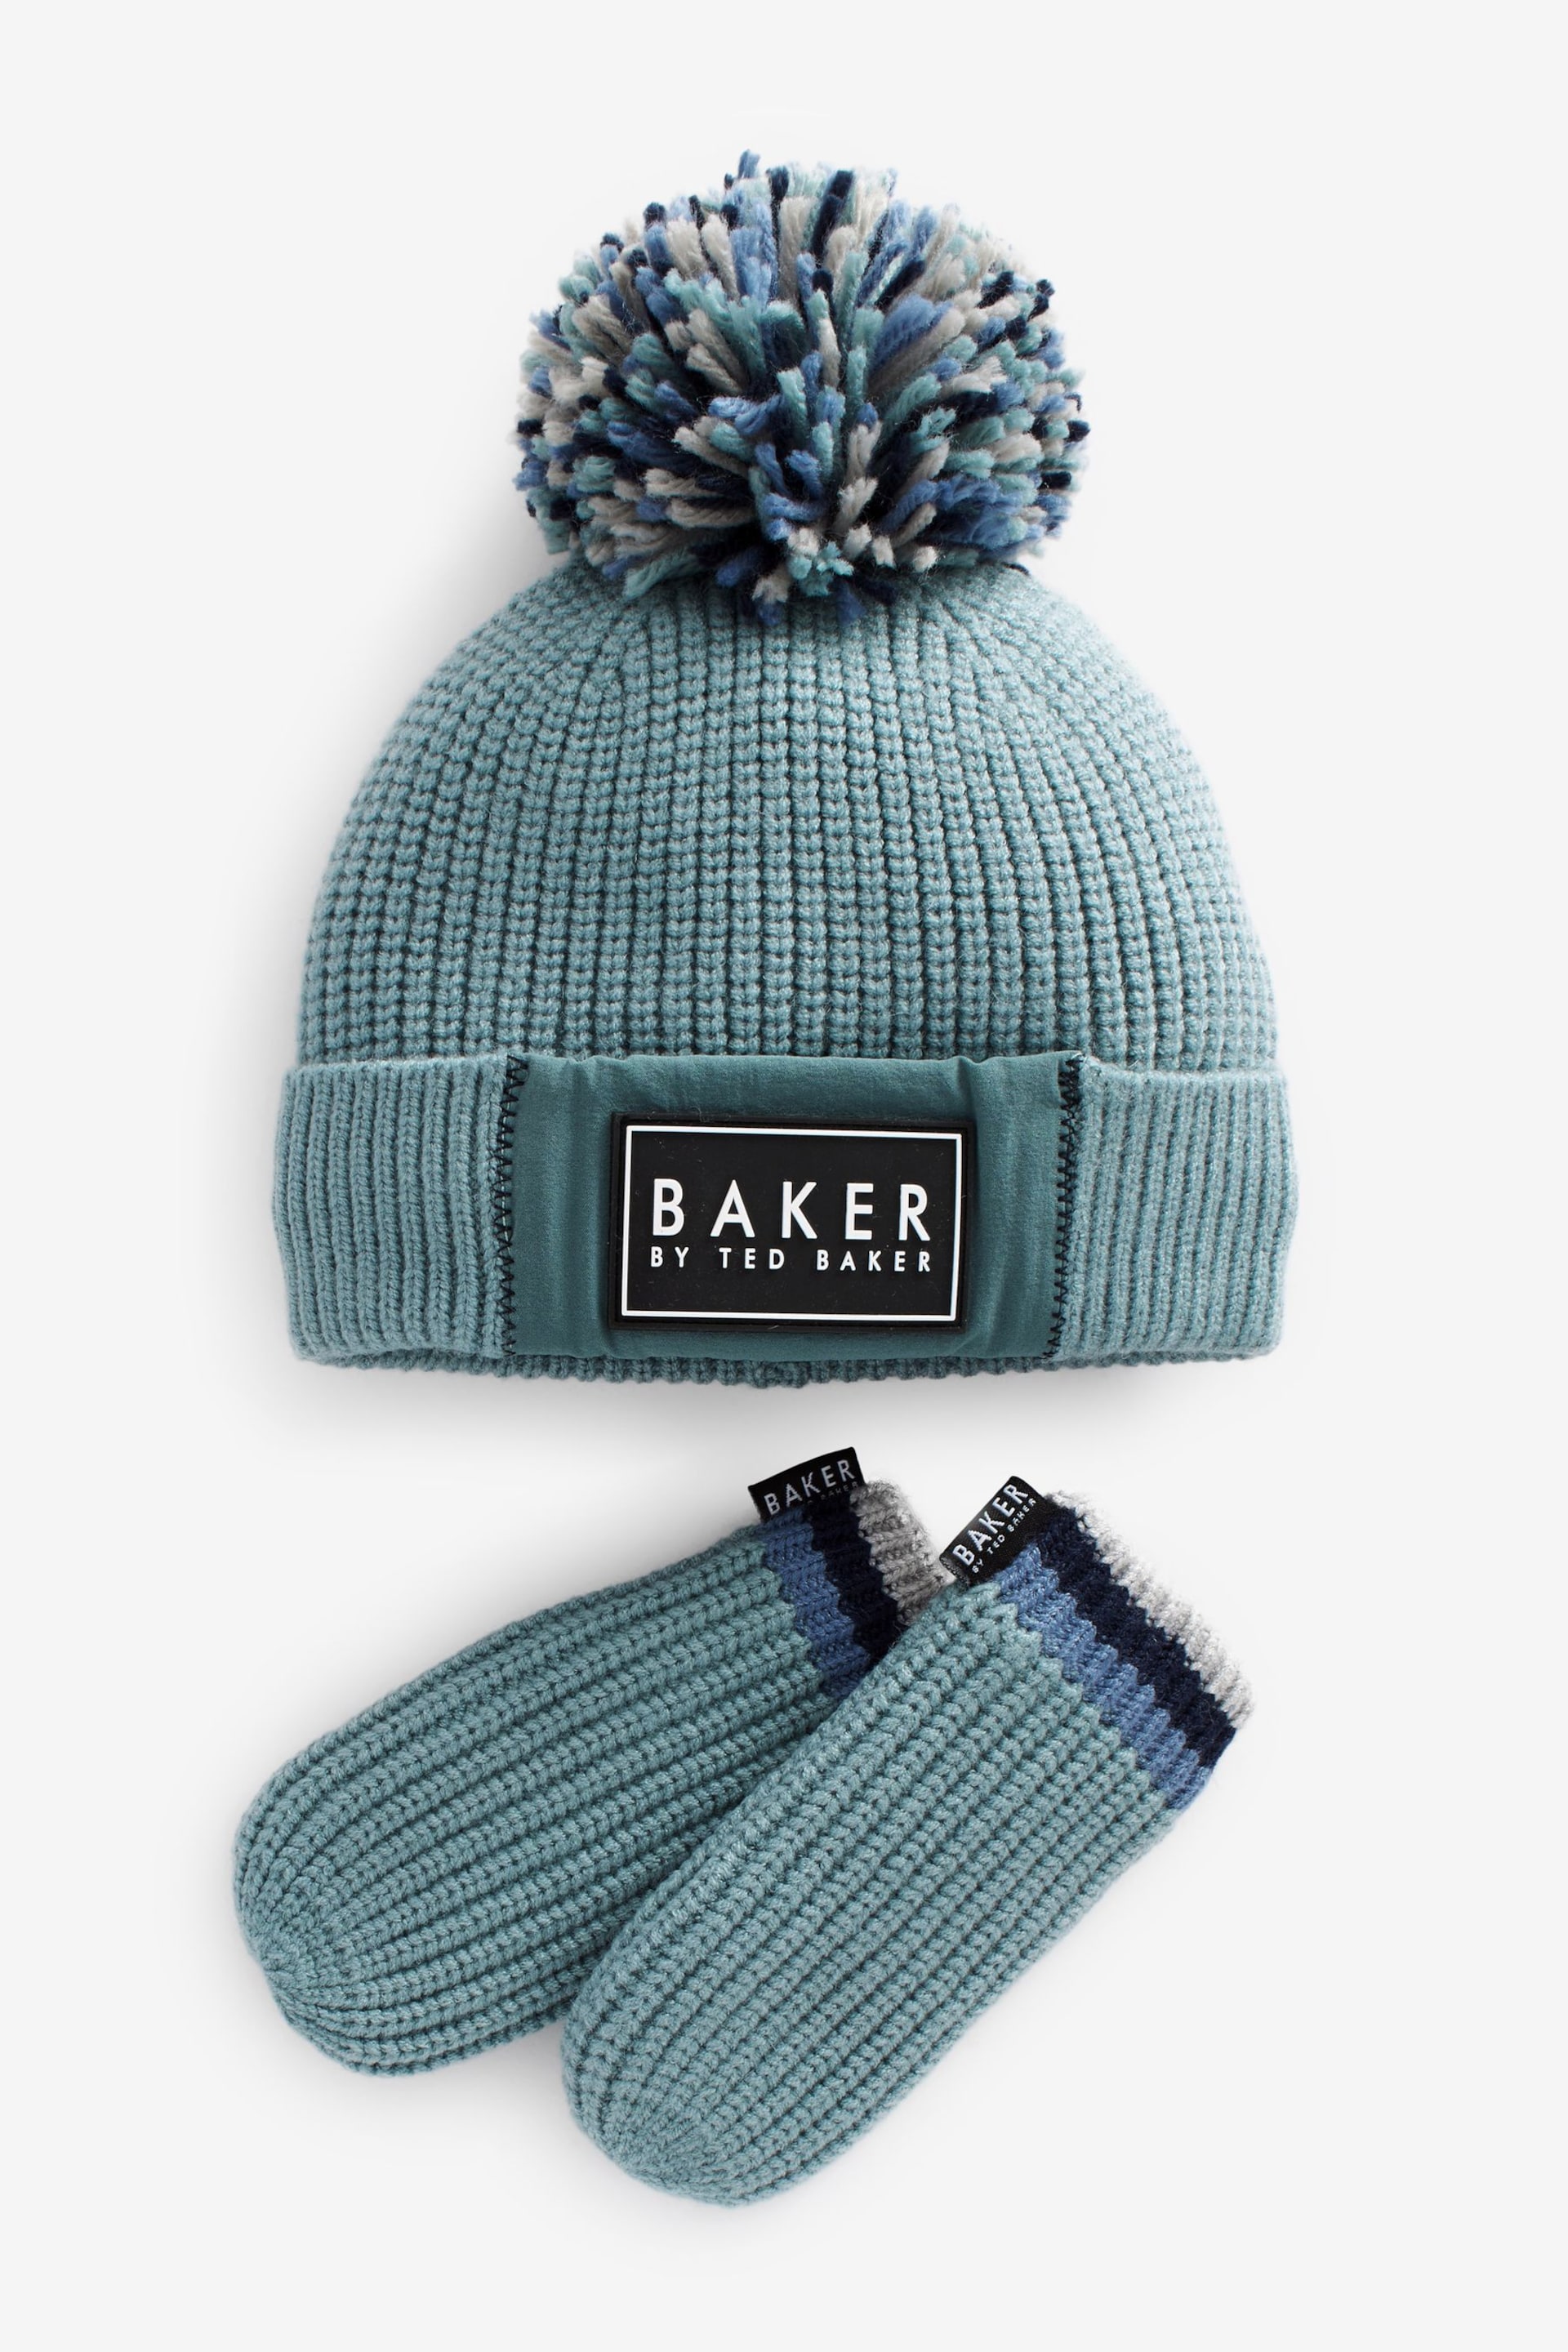 Baker by Ted Baker Boys Pom Hat and Mittens Set - Image 3 of 4